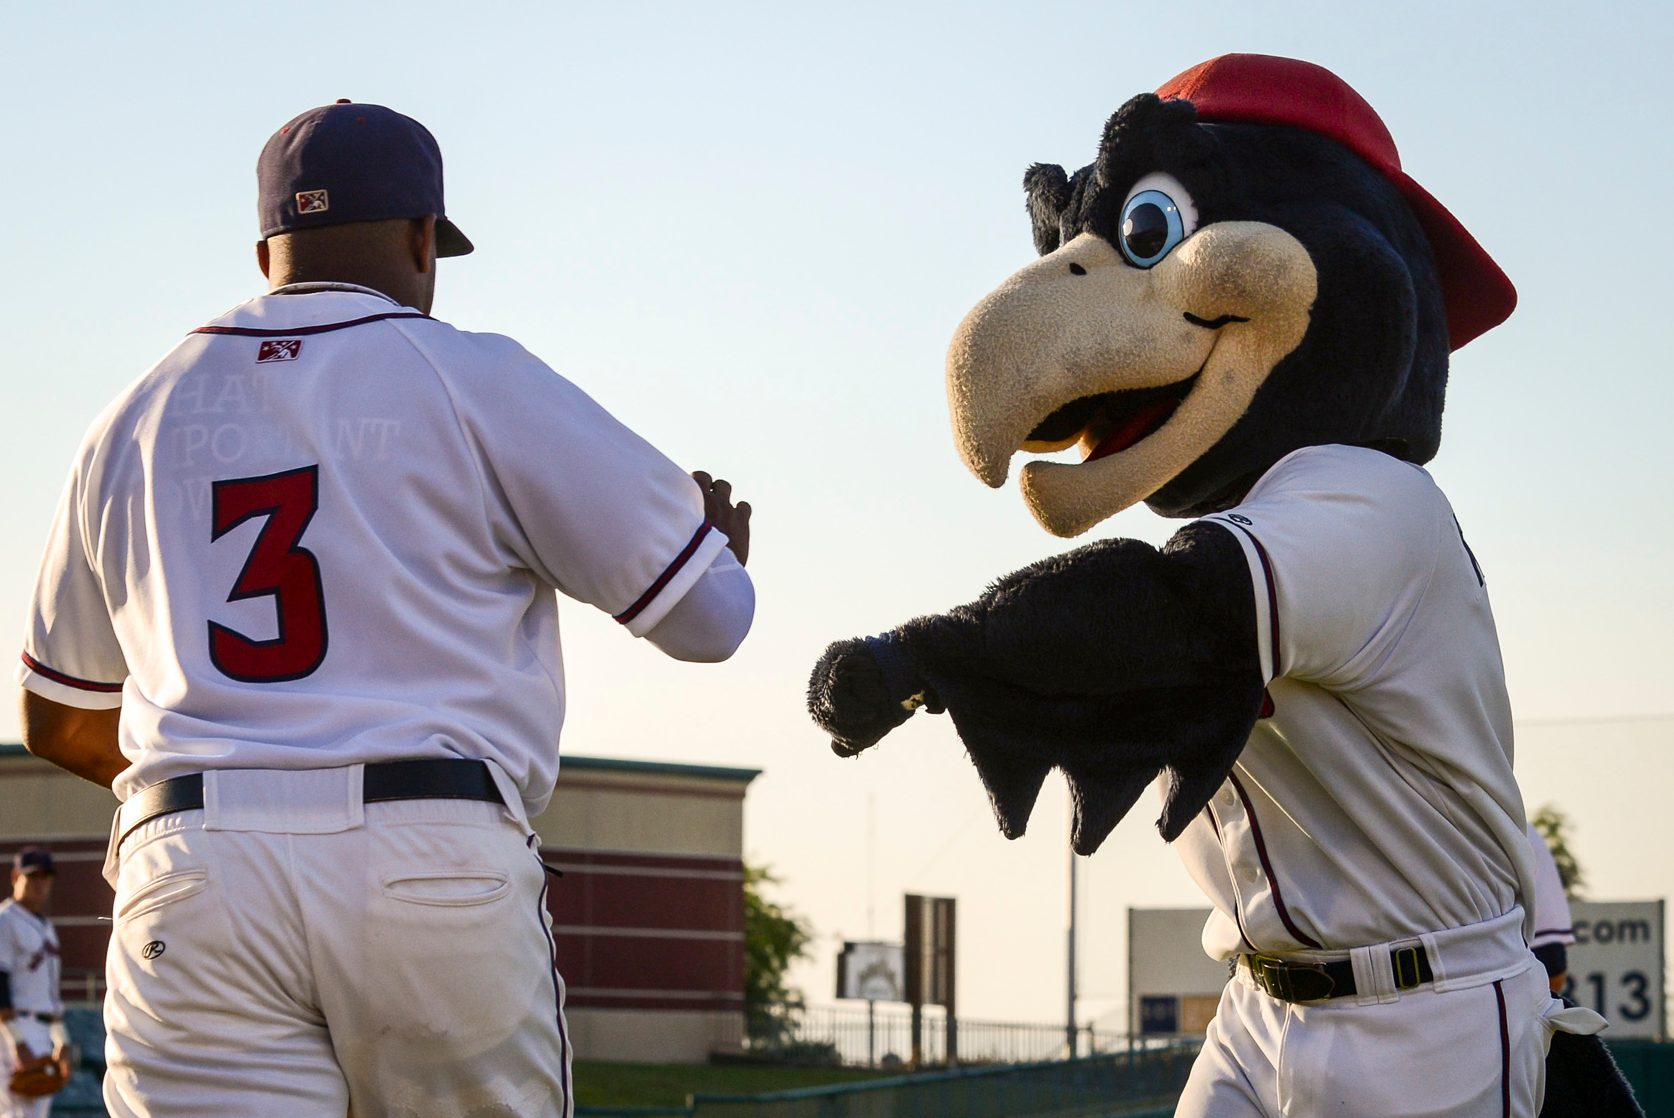 Jethawks player Delino DeShields high-fives the mascot as he takes the field at Hanger stadium